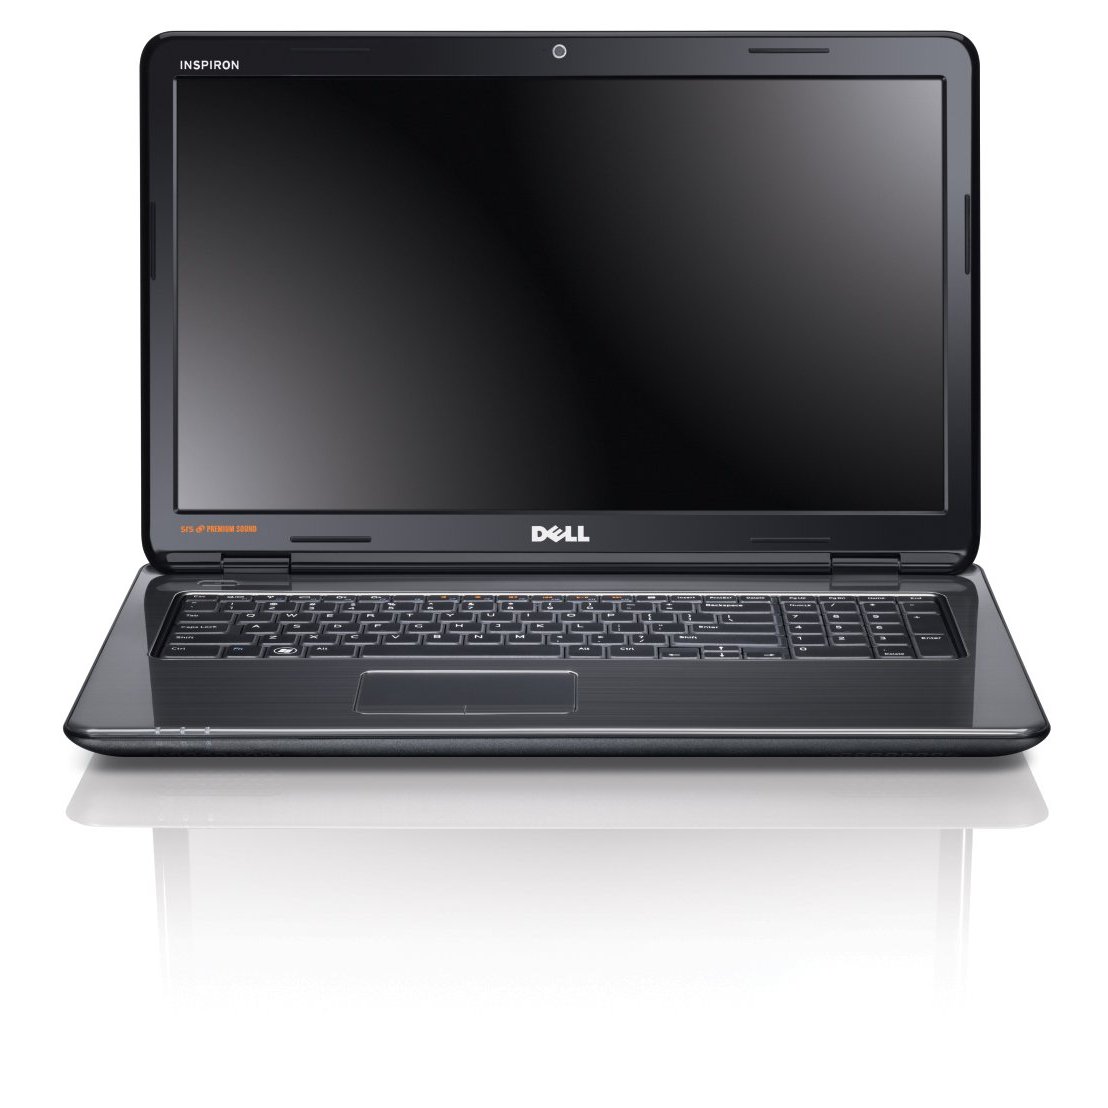 http://thetechjournal.com/wp-content/uploads/images/1201/1327168457-dell-inspiron-17rn-i17rn4709dbk-173inch-laptop-1.jpg